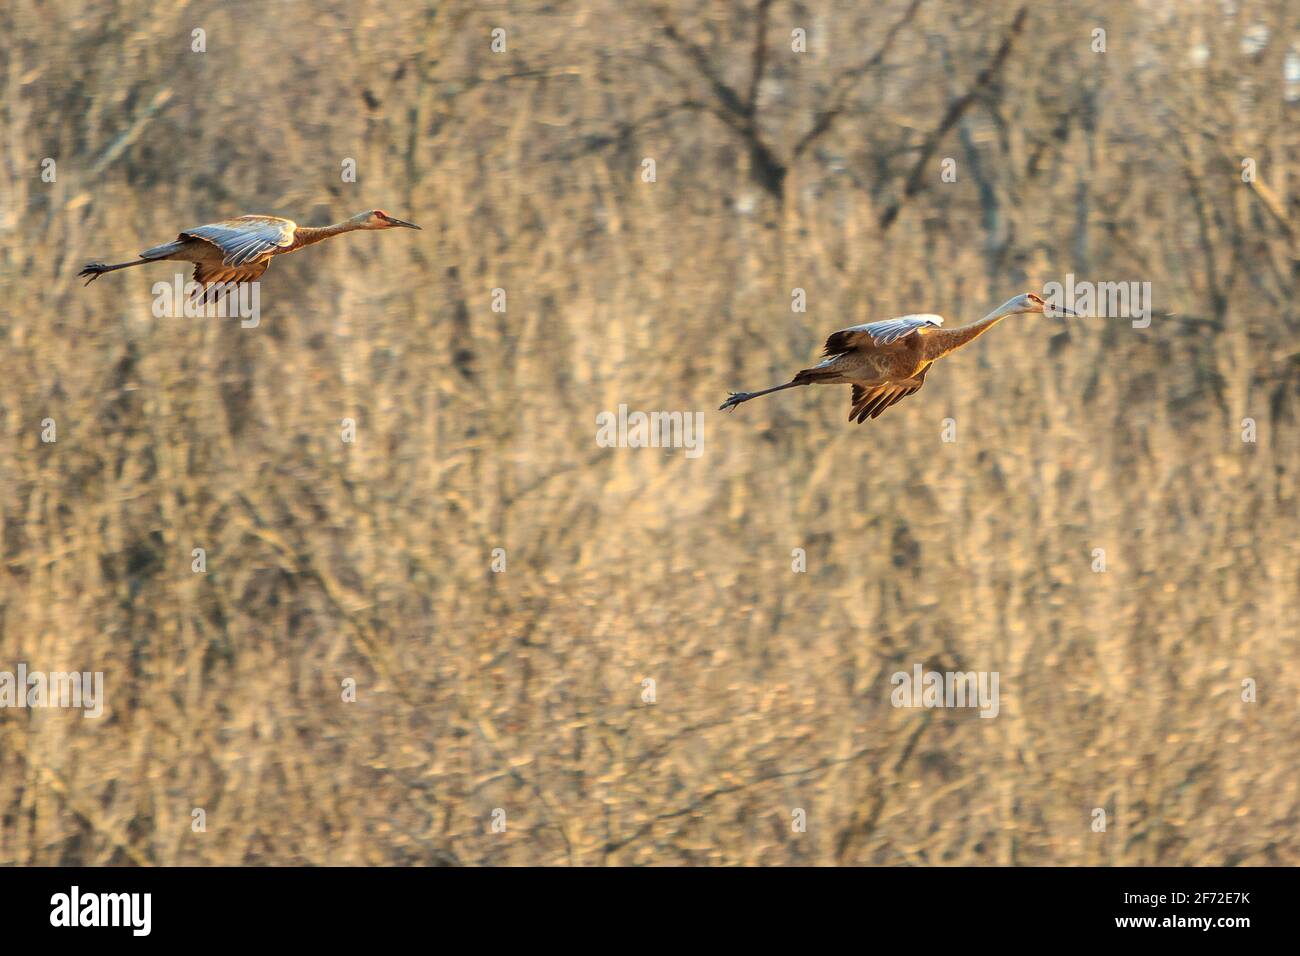 Flaps Down    Trumpeting cries announced their arrival to the nesting site. These paired Sandhill Cranes (Antigone canadensis) spent the day hunting a Stock Photo